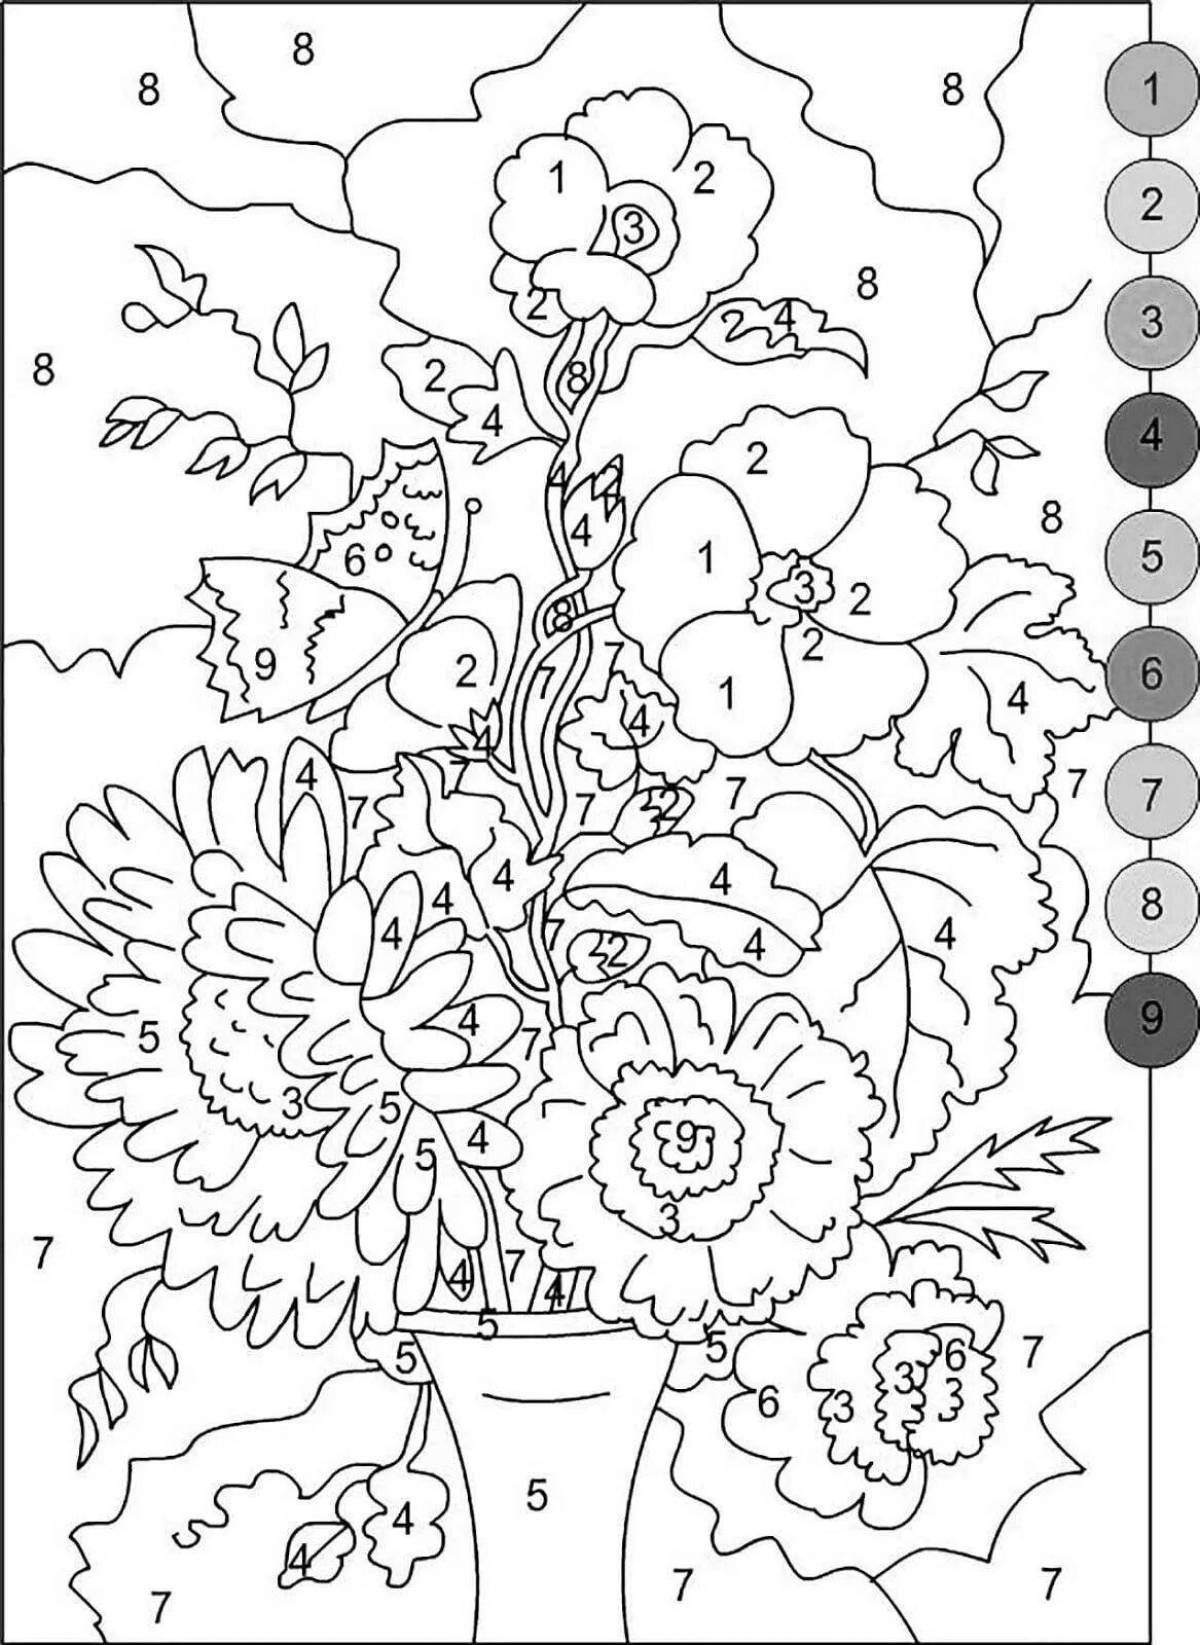 Coloring by numbers without download